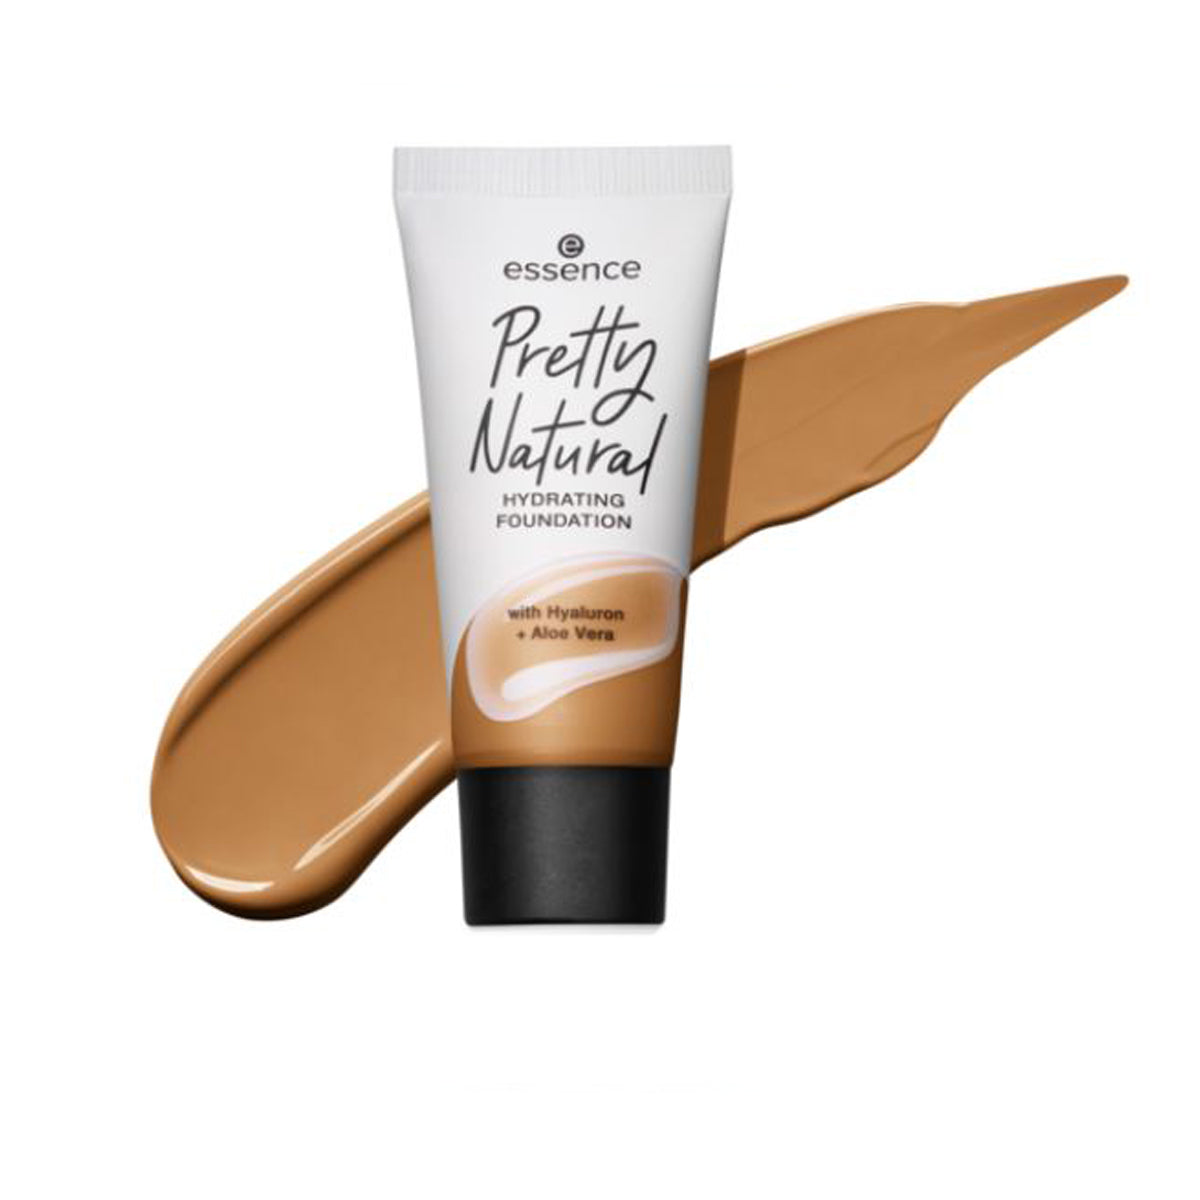 BASE DE MAQUILLAJE PRETTY NATURAL HYDRATING OUTLET - ESSENCE